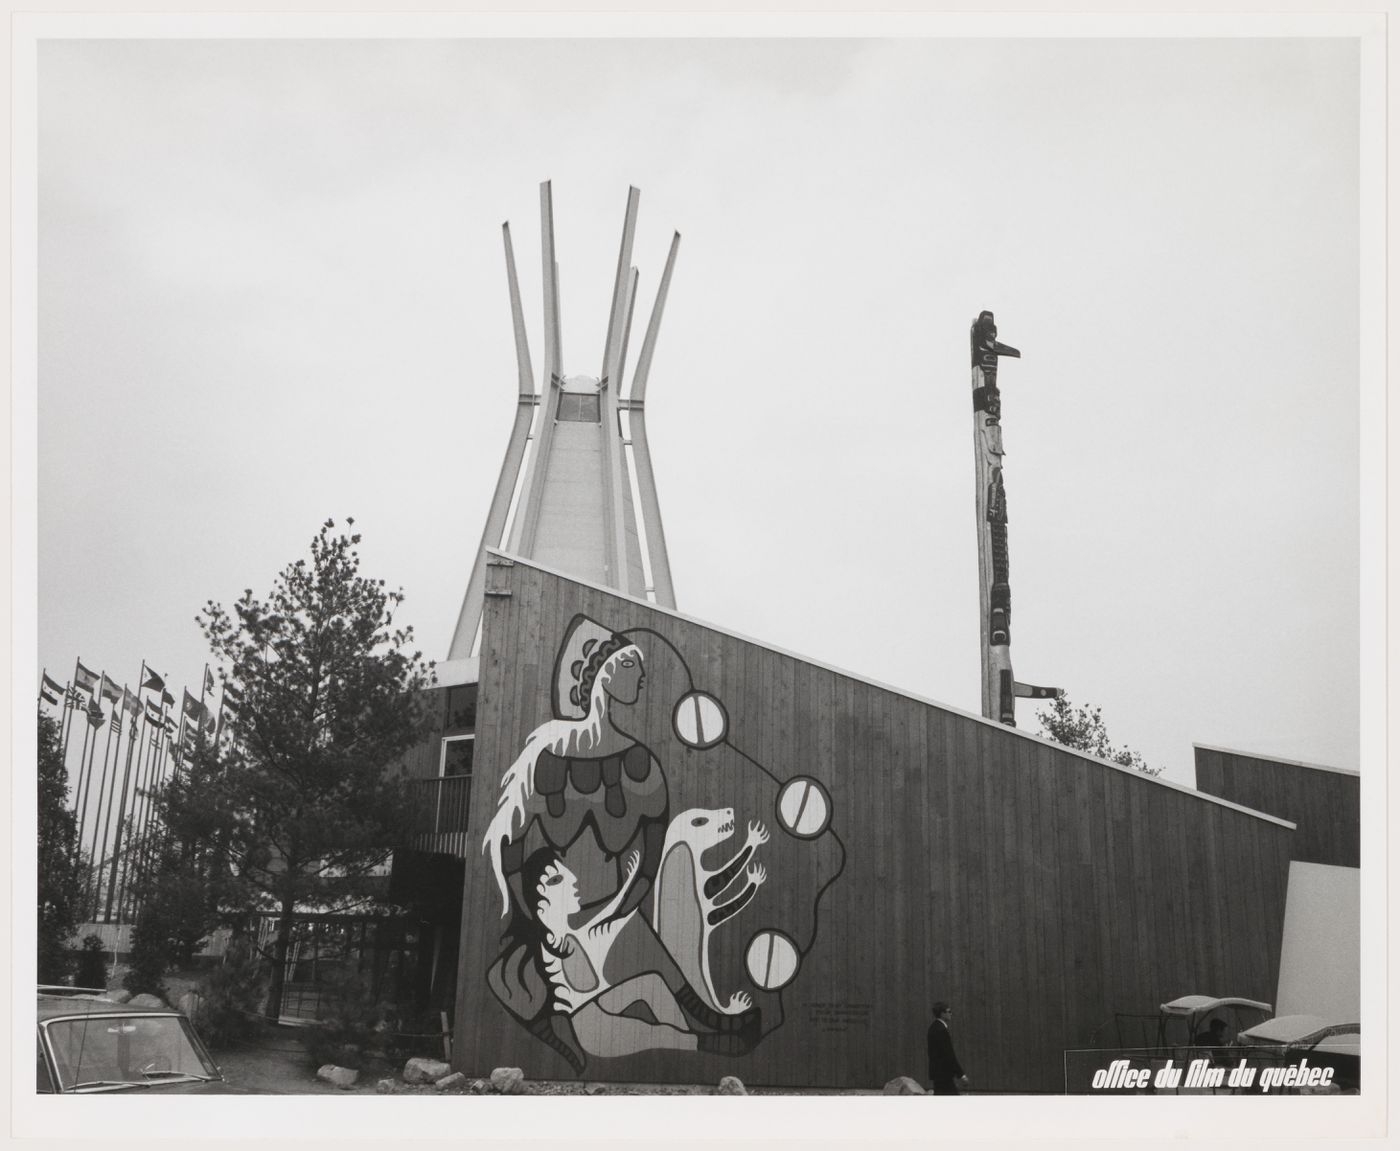 View of the Indians of Canada Pavilion with the Totem Kwakiutl created by Tony and Henry Hunt, Expo 67, Montréal, Québec